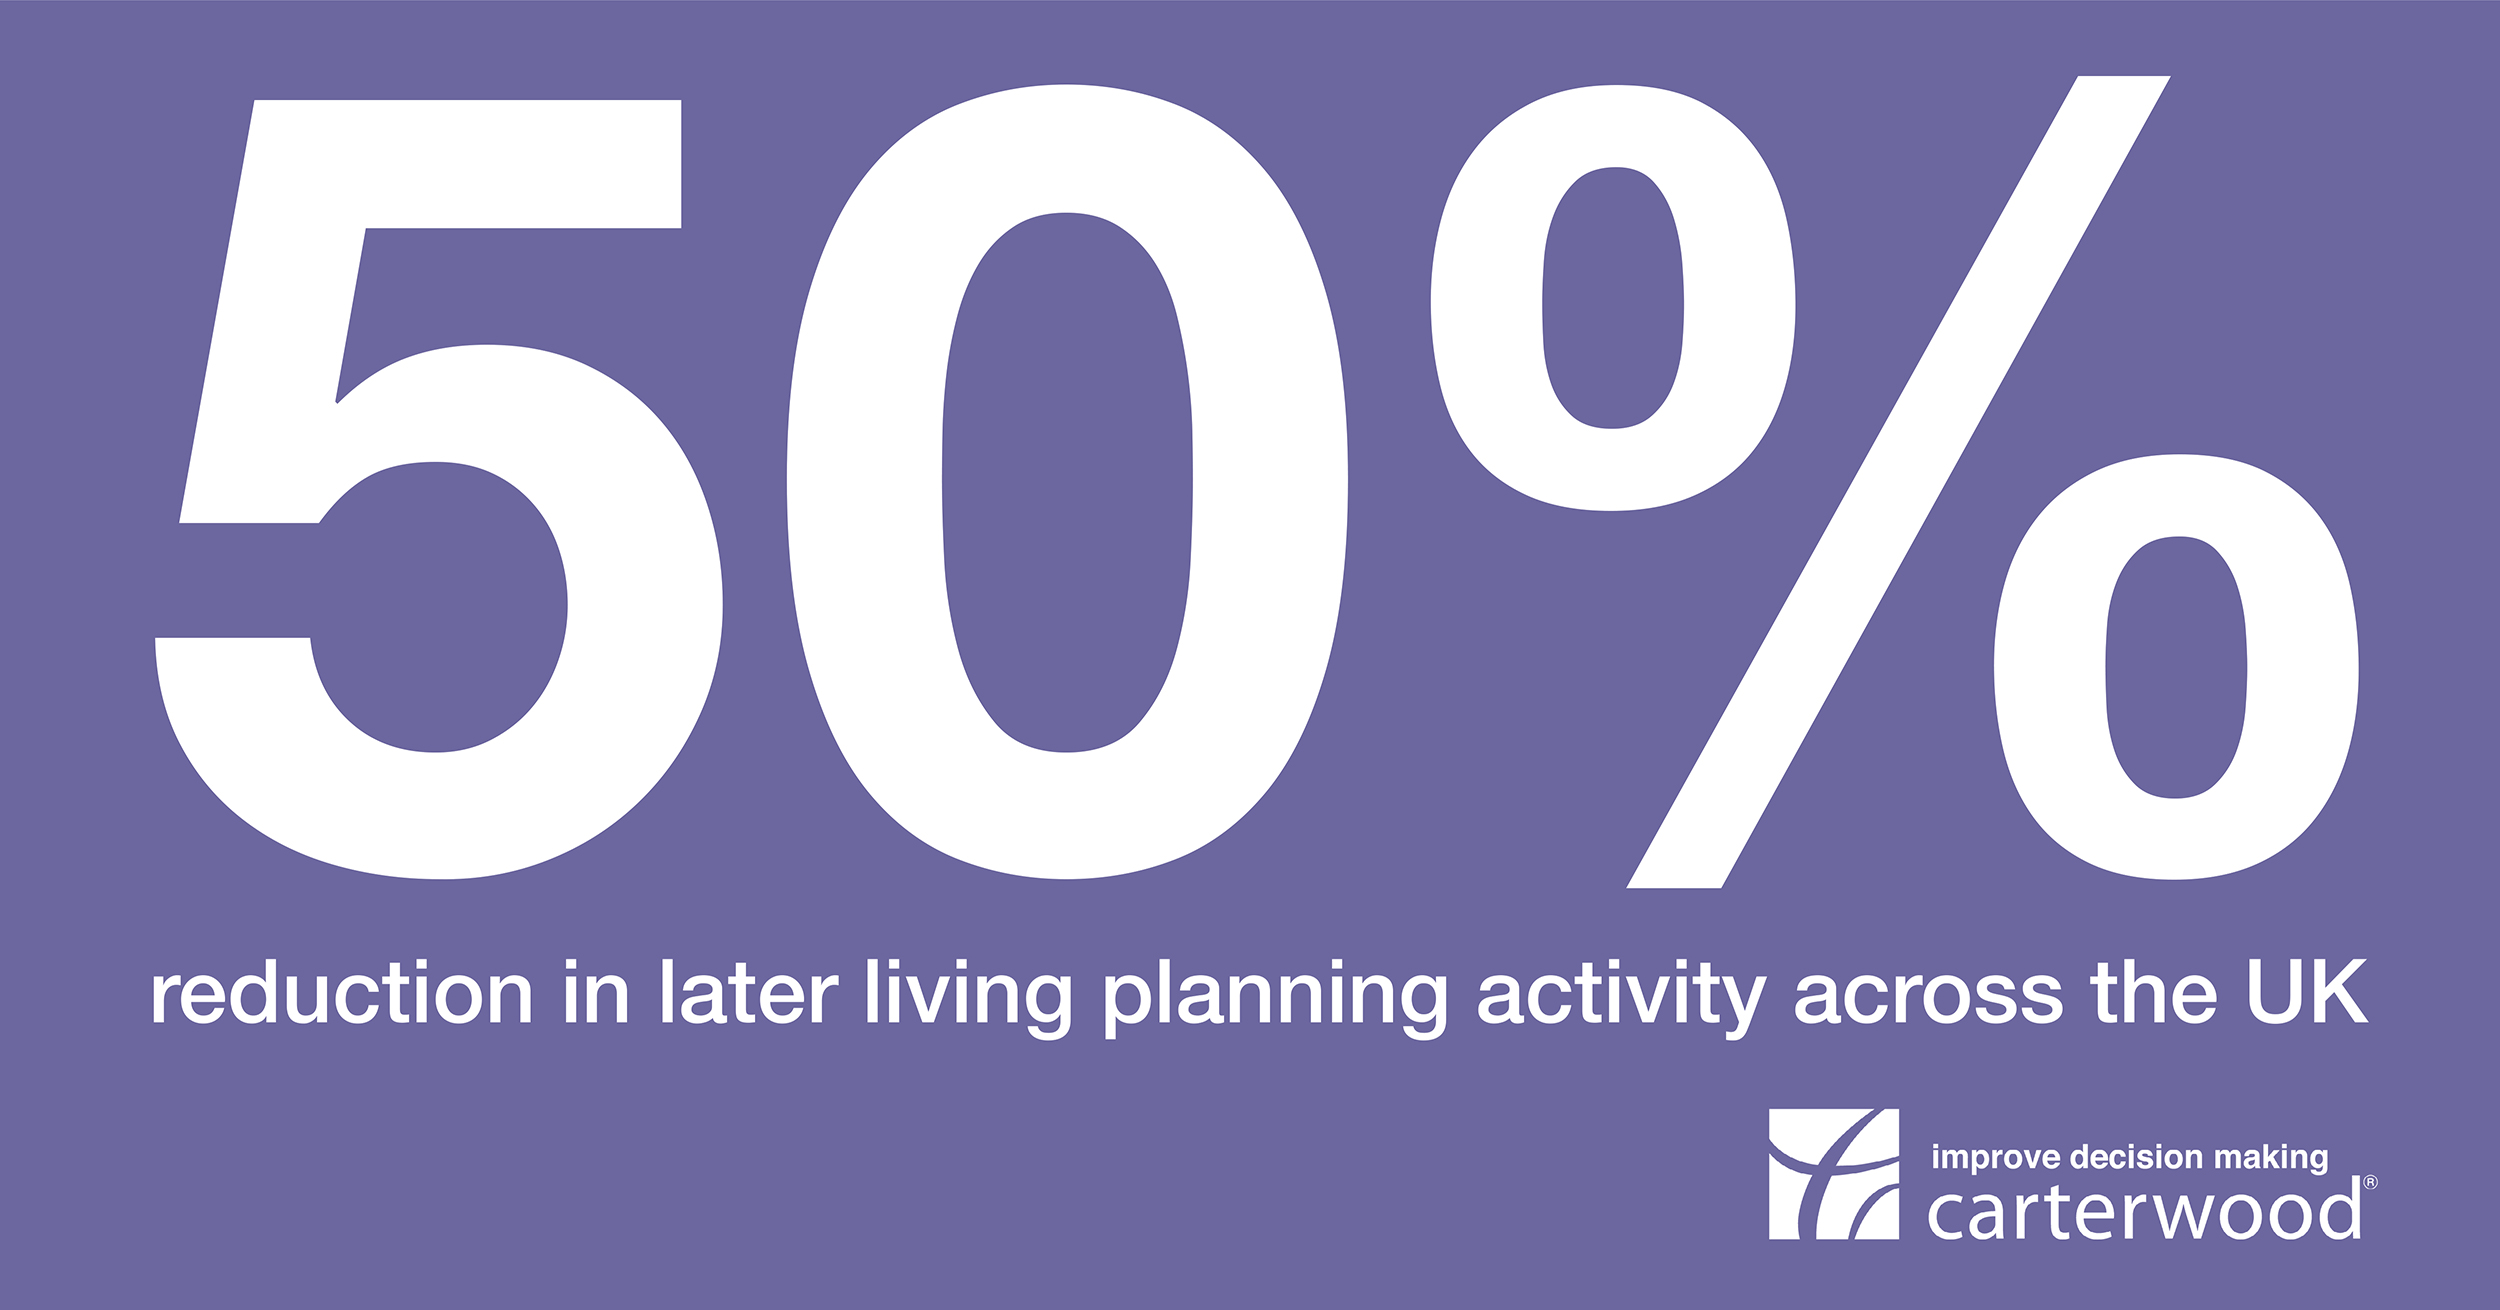 50% reduction in later living planning activity across the UK